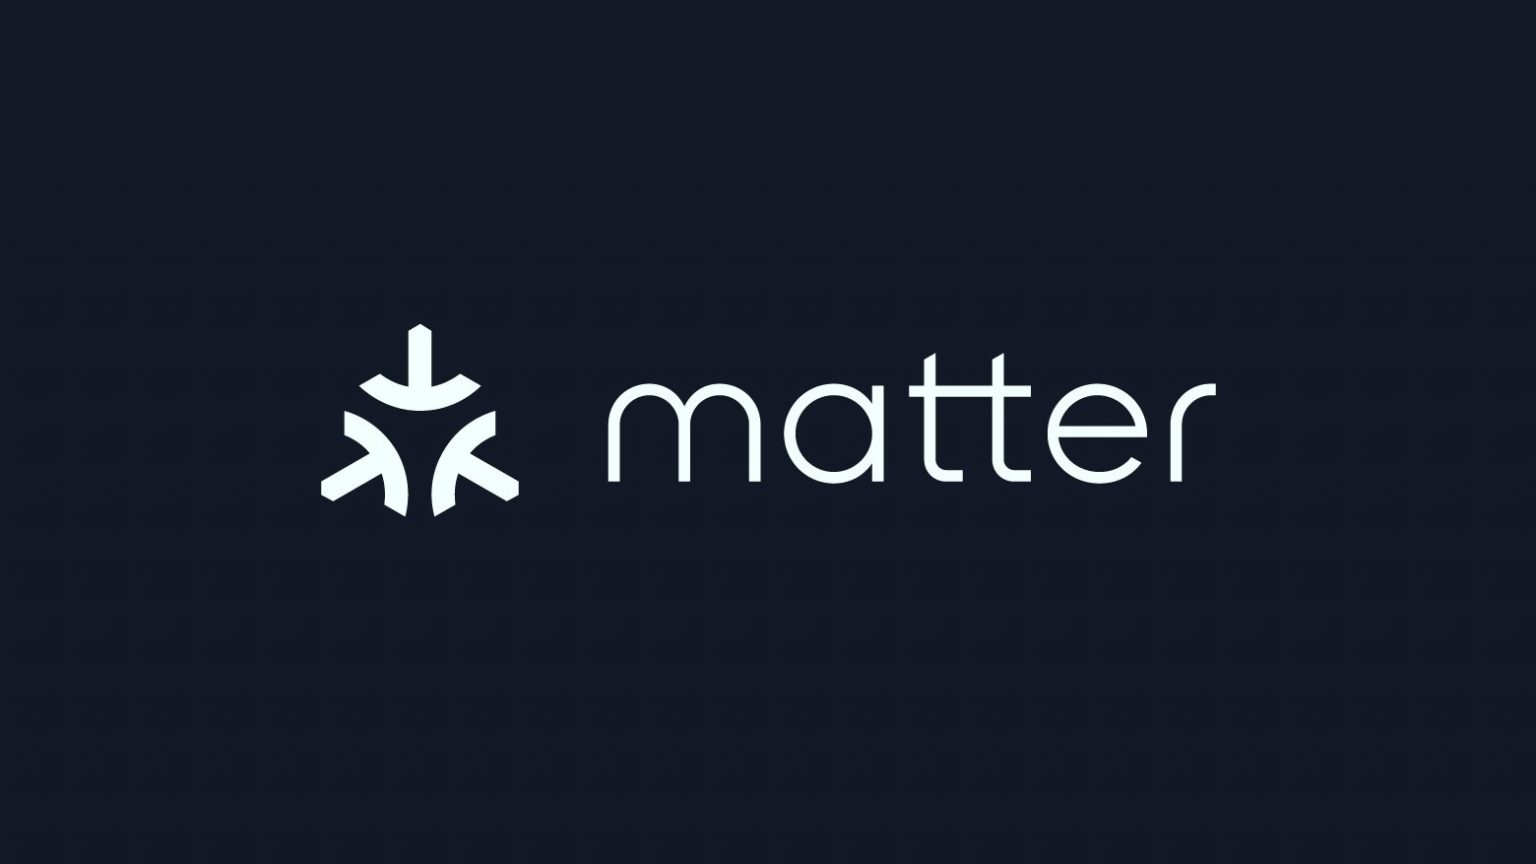 Matter is a new interoperable homer automation standard back by Apple, Amazon, Google and m ore.